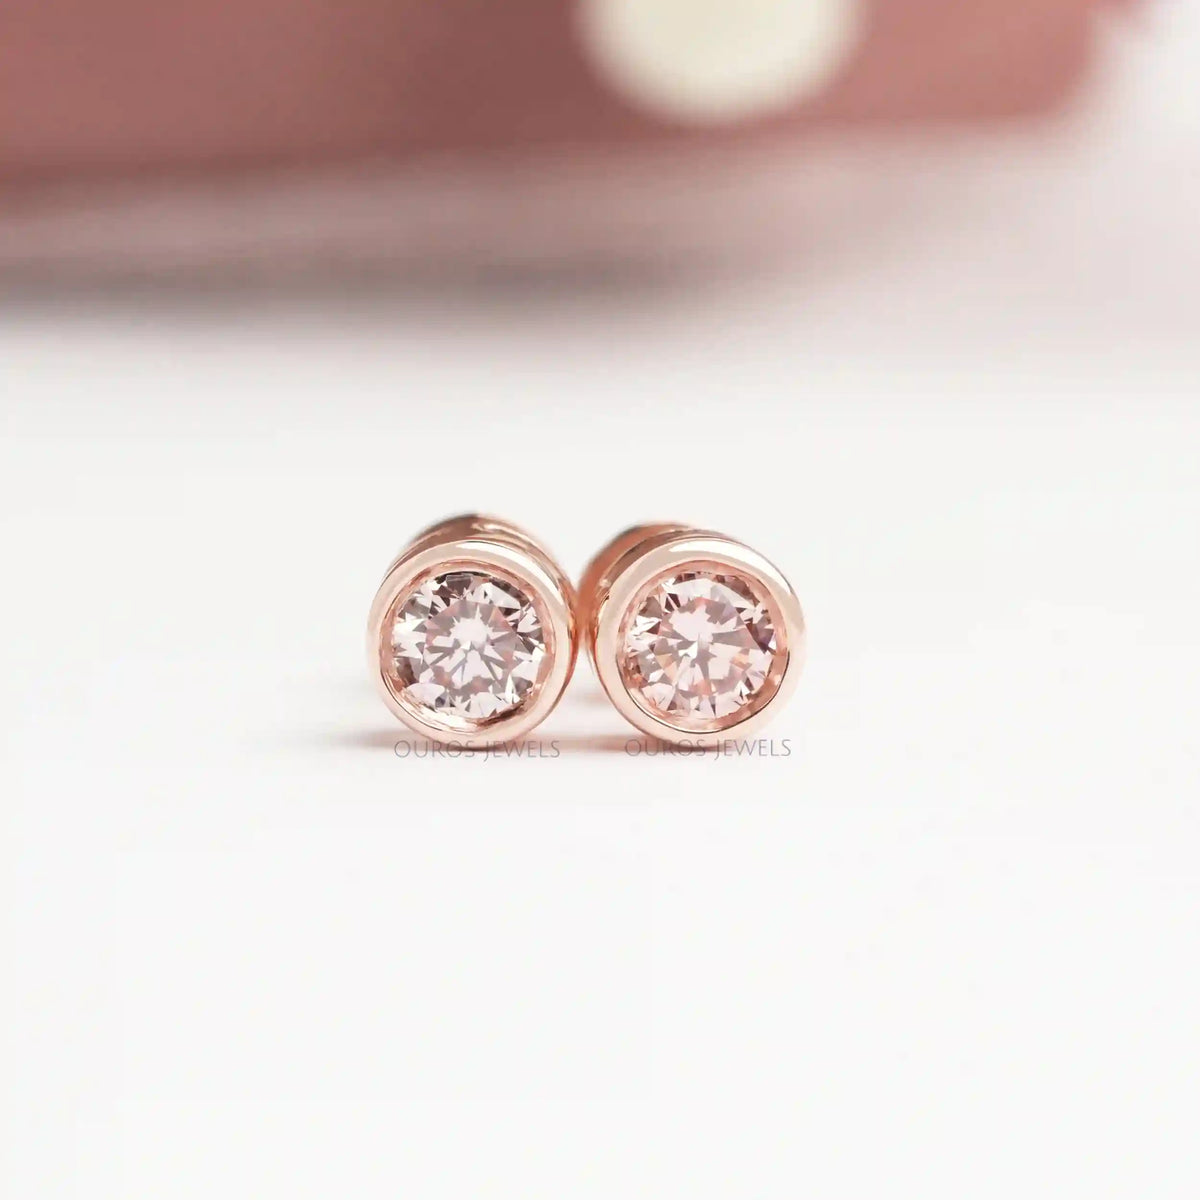 Rose Gold Plated Bezel set Heart Earrings Created with Zircondia Crystals  by Philip Jones Jewellery